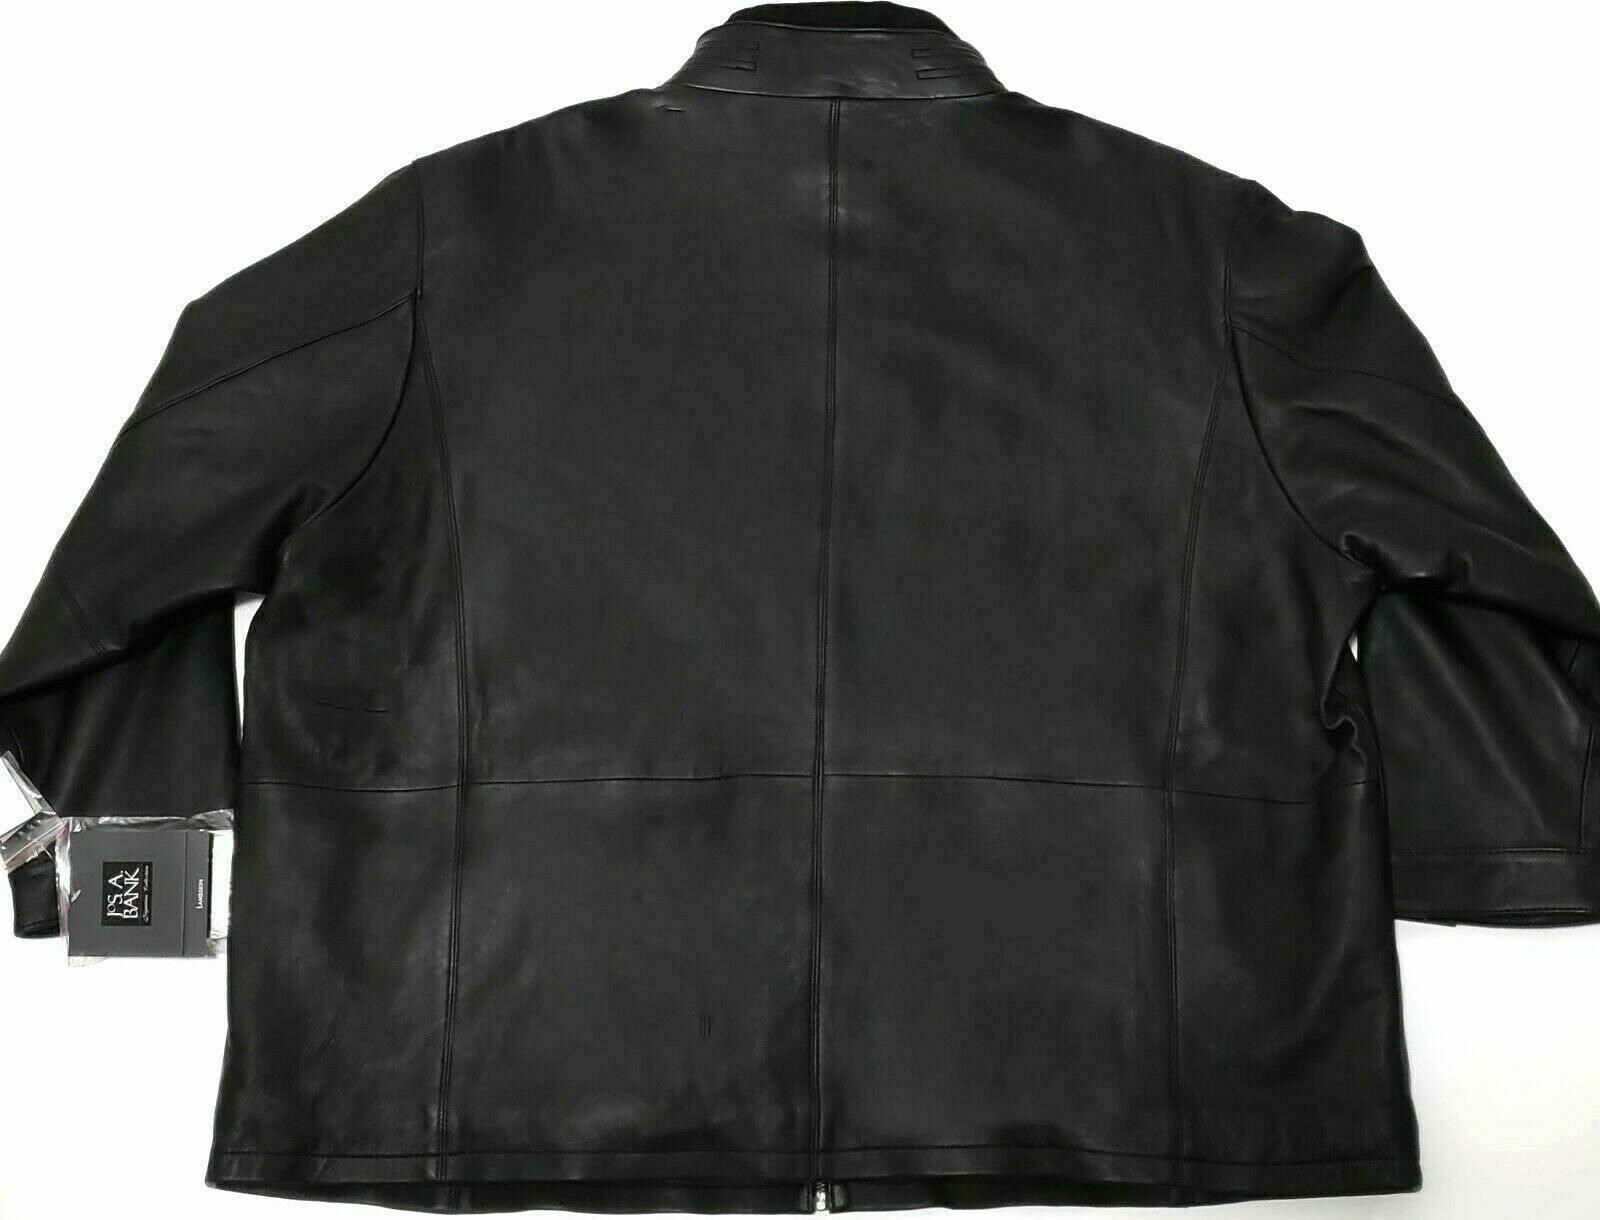 JOS.A.BANK Signature Collection Mens Winter Lamb Leather Jacket Big Size 3XB - SVNYFancy